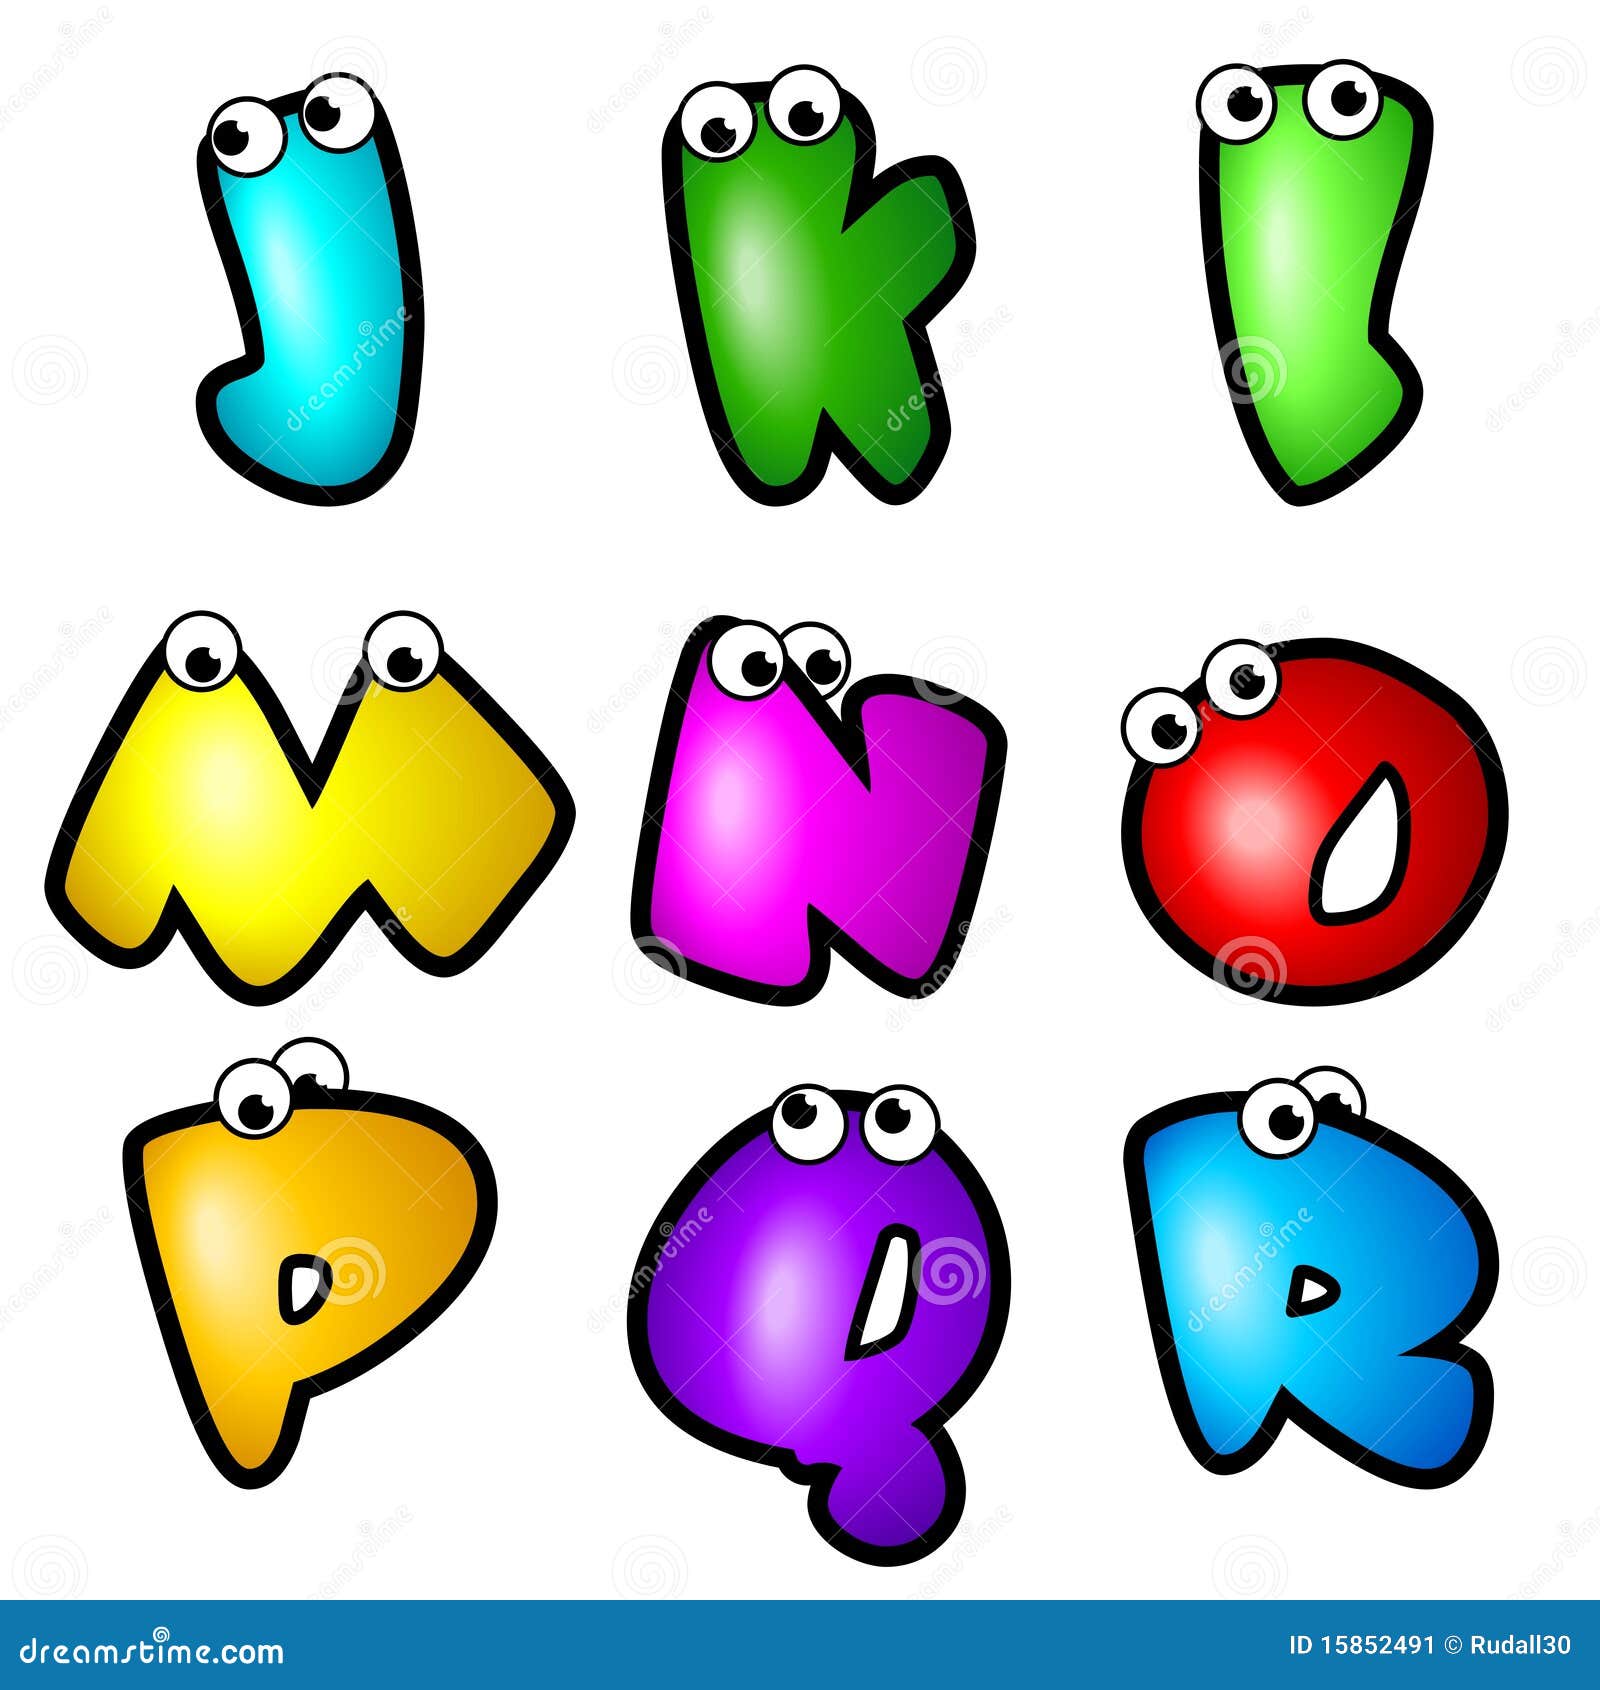 Cartoon Font Type_Letter J To R Stock Vector - Illustration of type, clip:  15852491